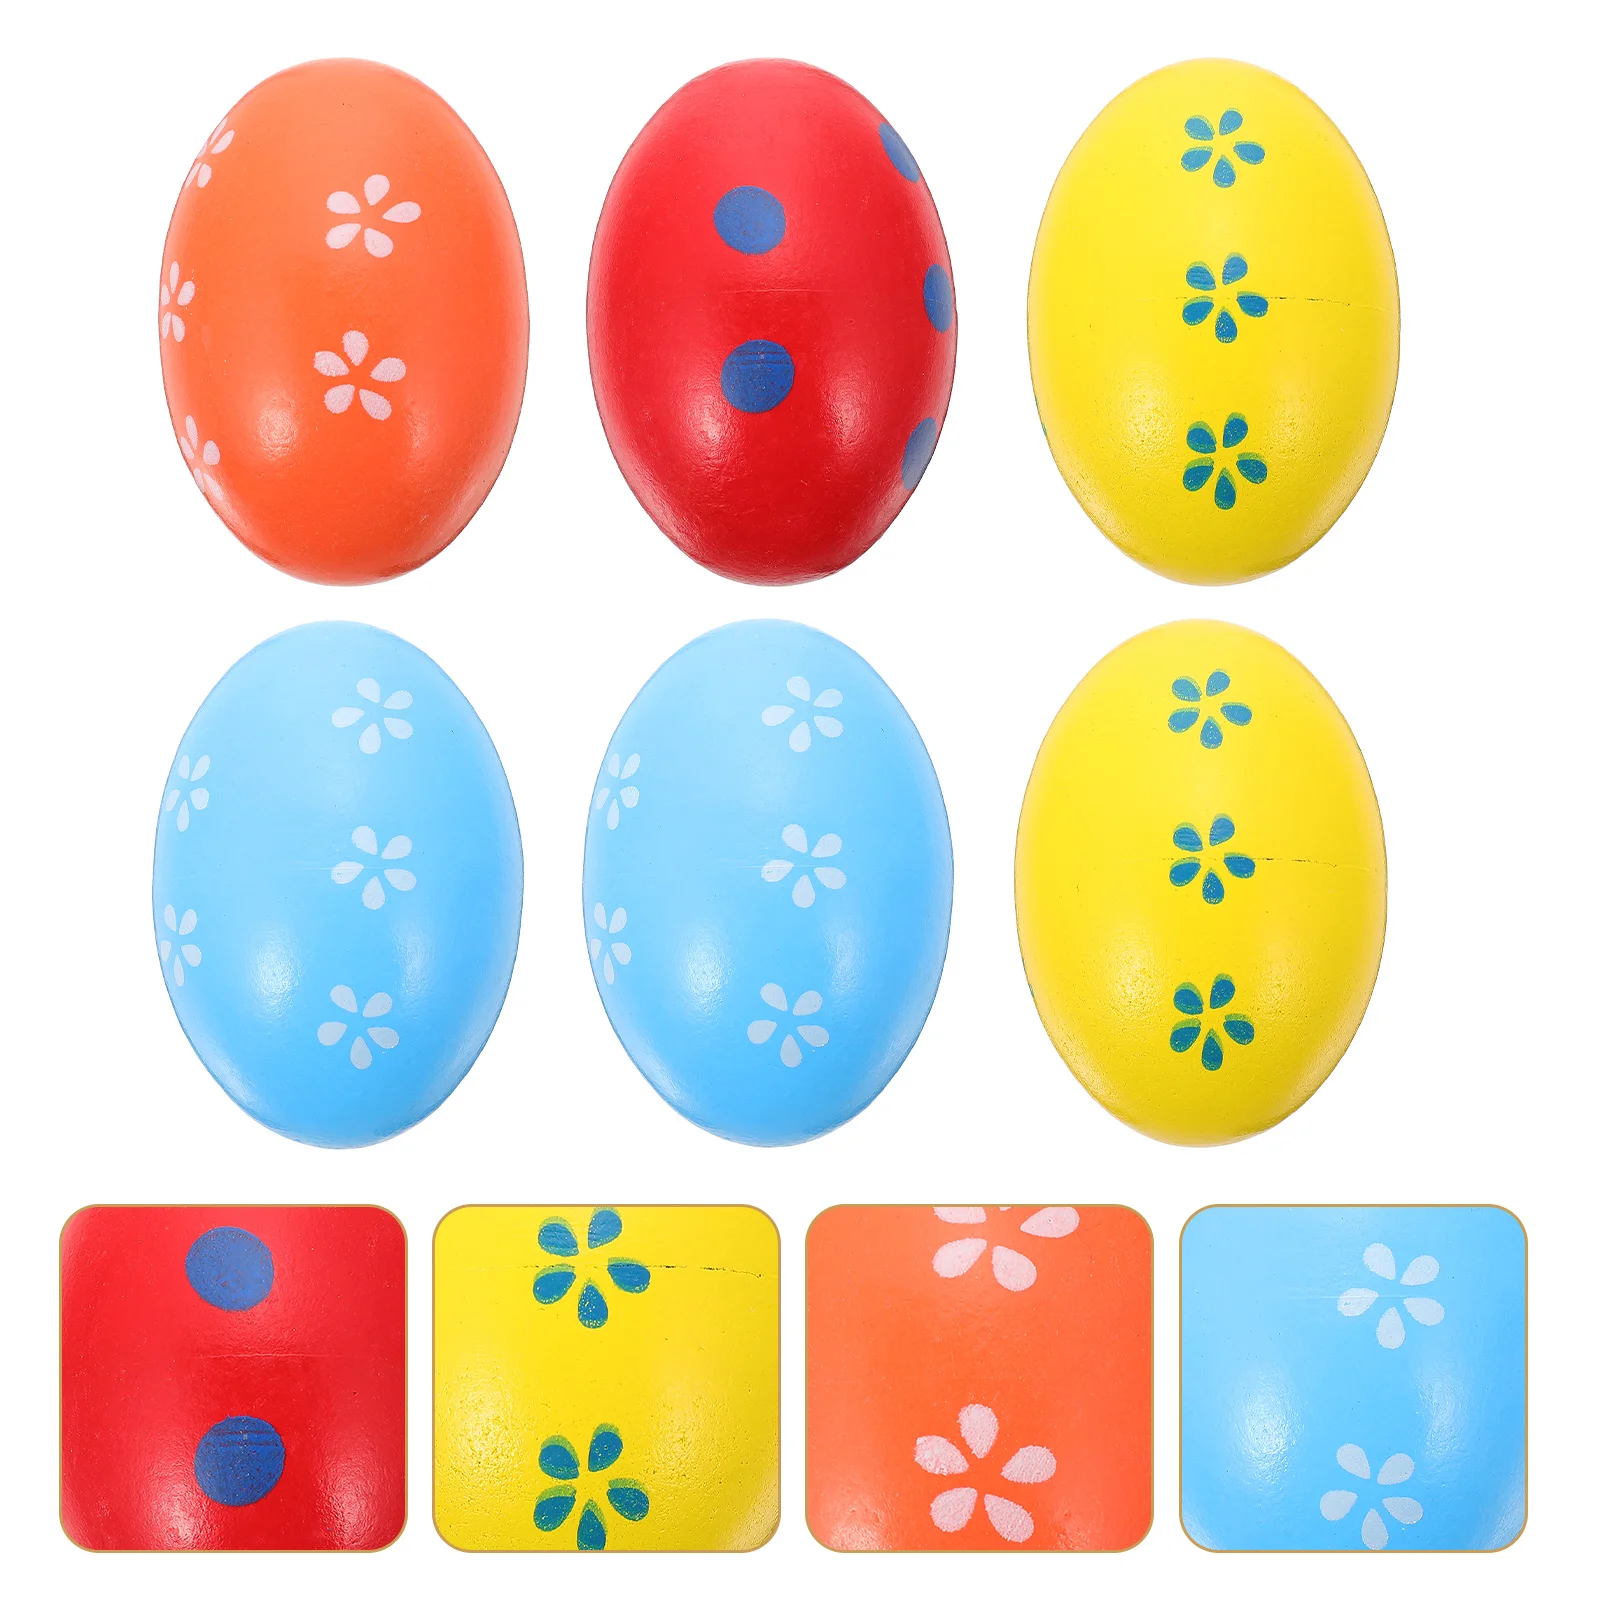 

6 Pcs Orf Sand Egg Wooden Toy Eggs Shakers Hitting Small Music Instrument Toys Musical Kids Baby Percussion Instruments